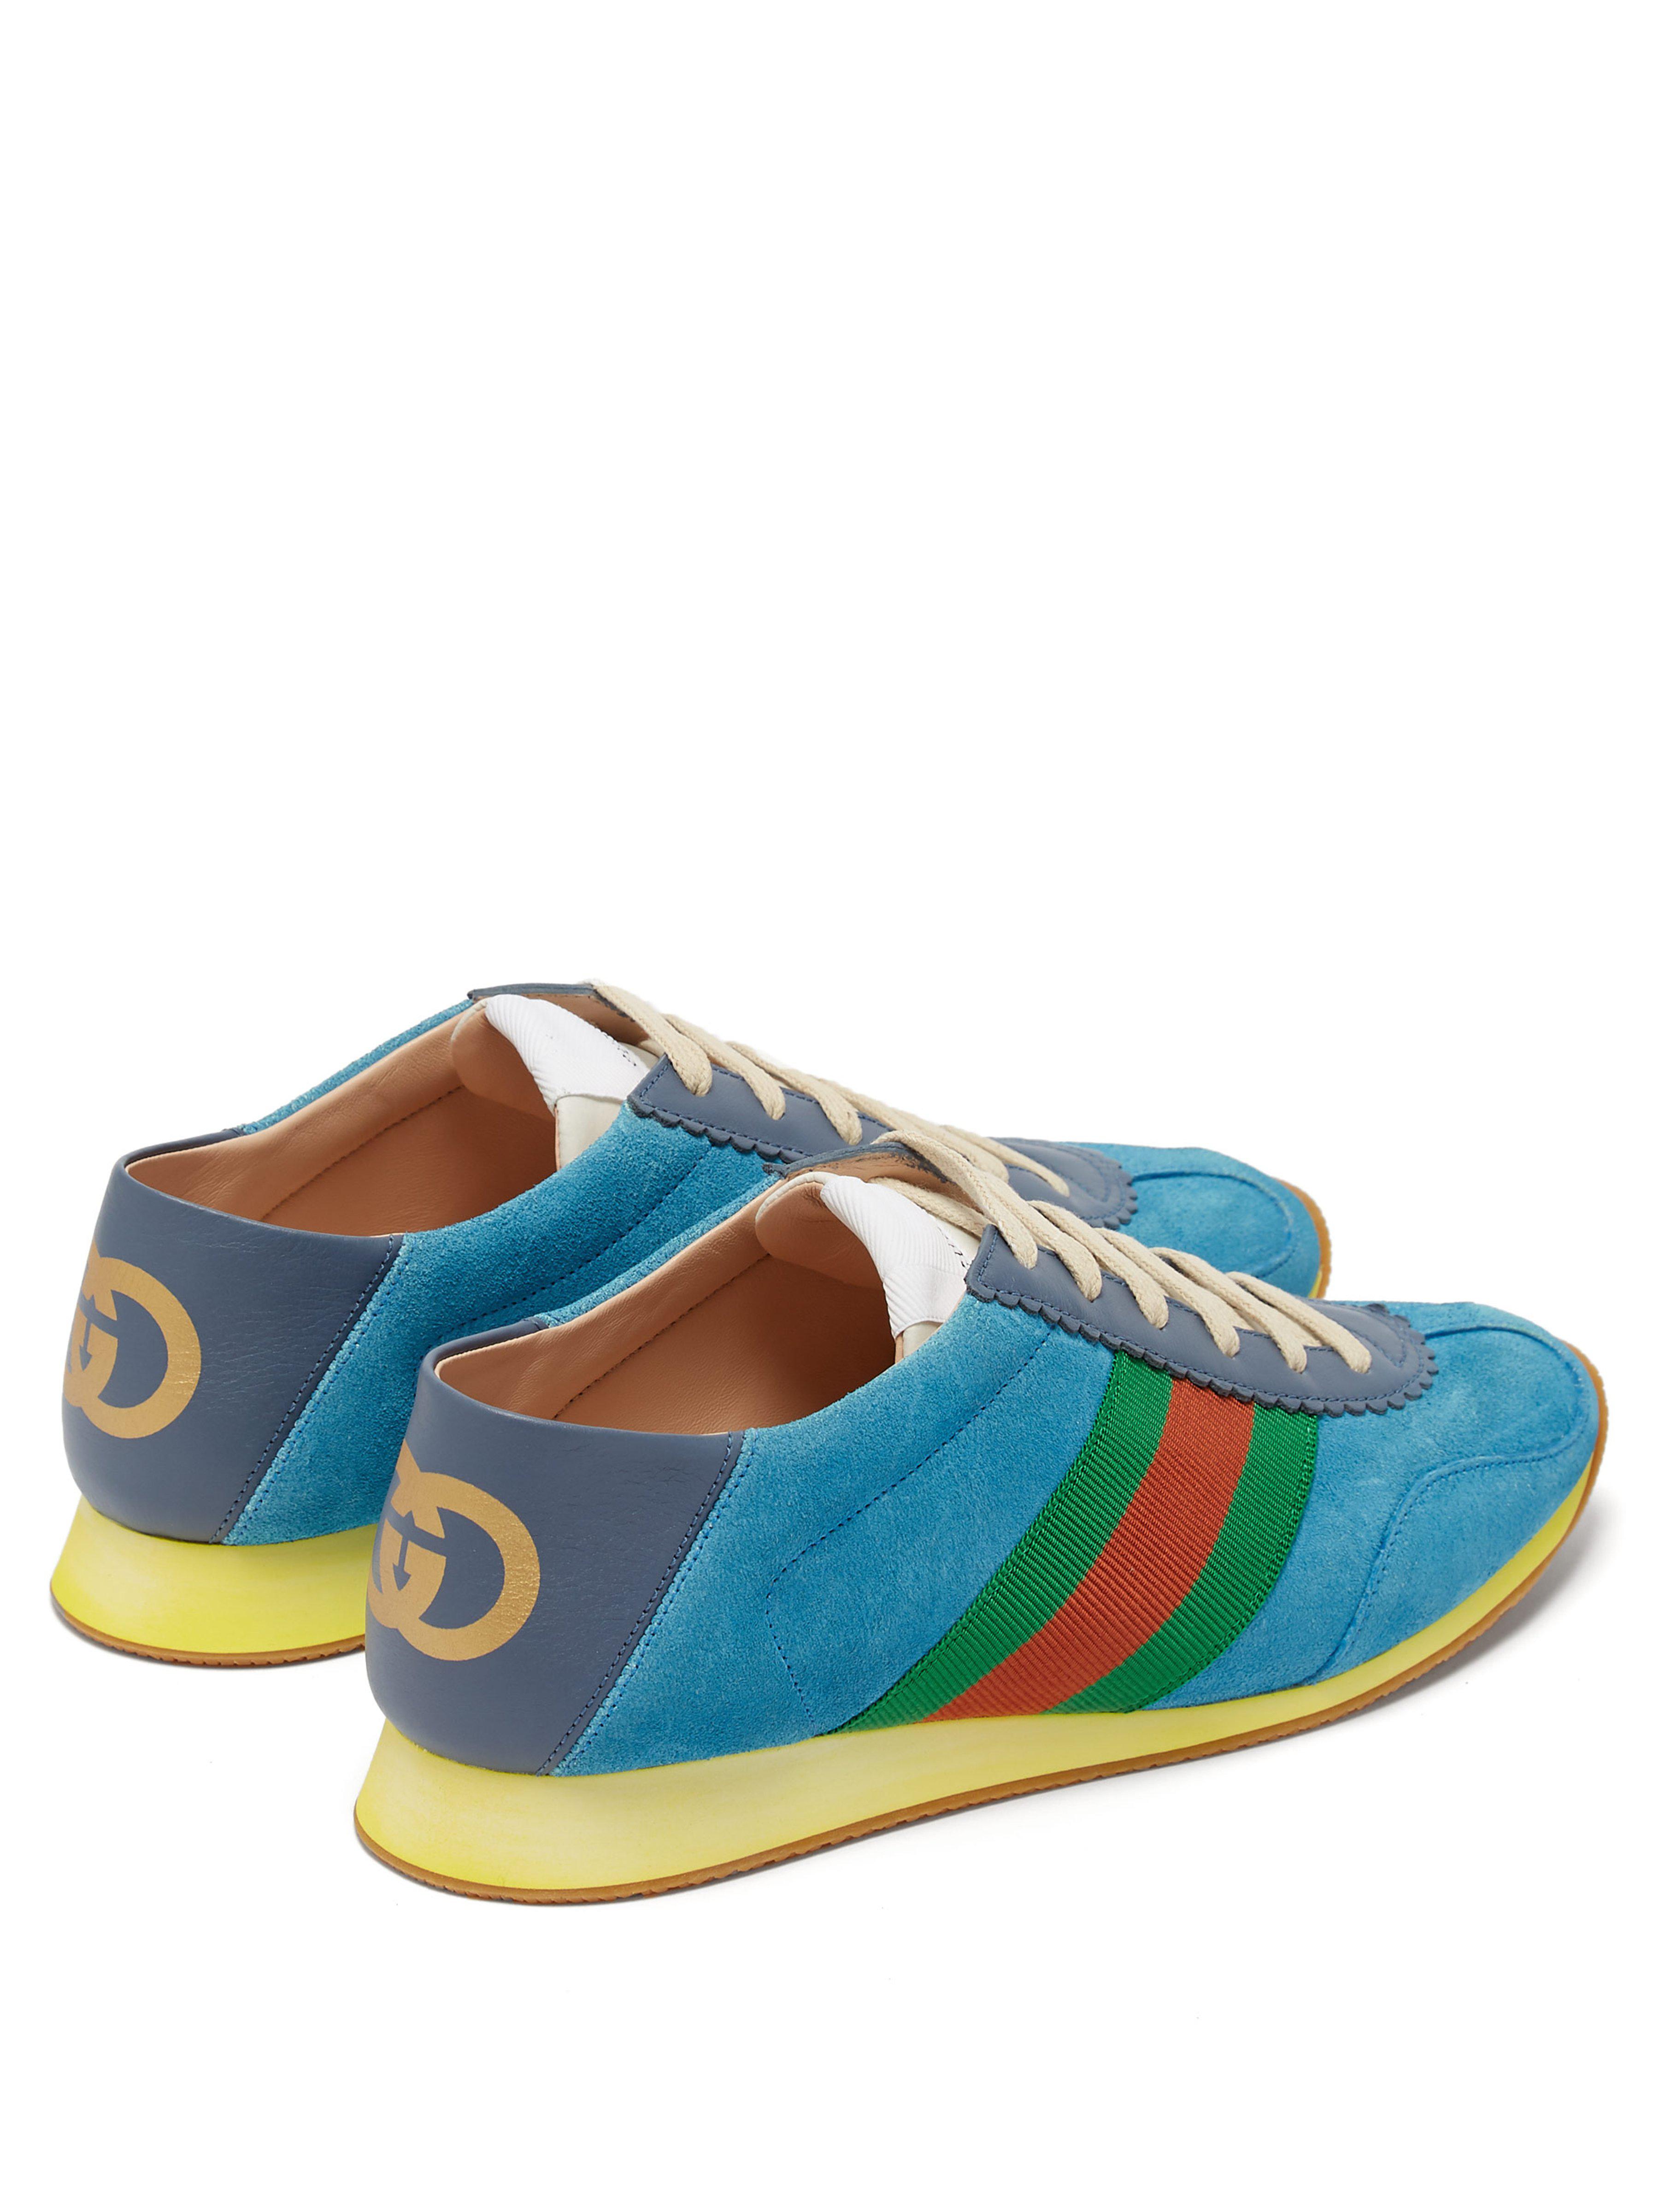 Gucci Suede Sneaker With Web in Blue - Lyst